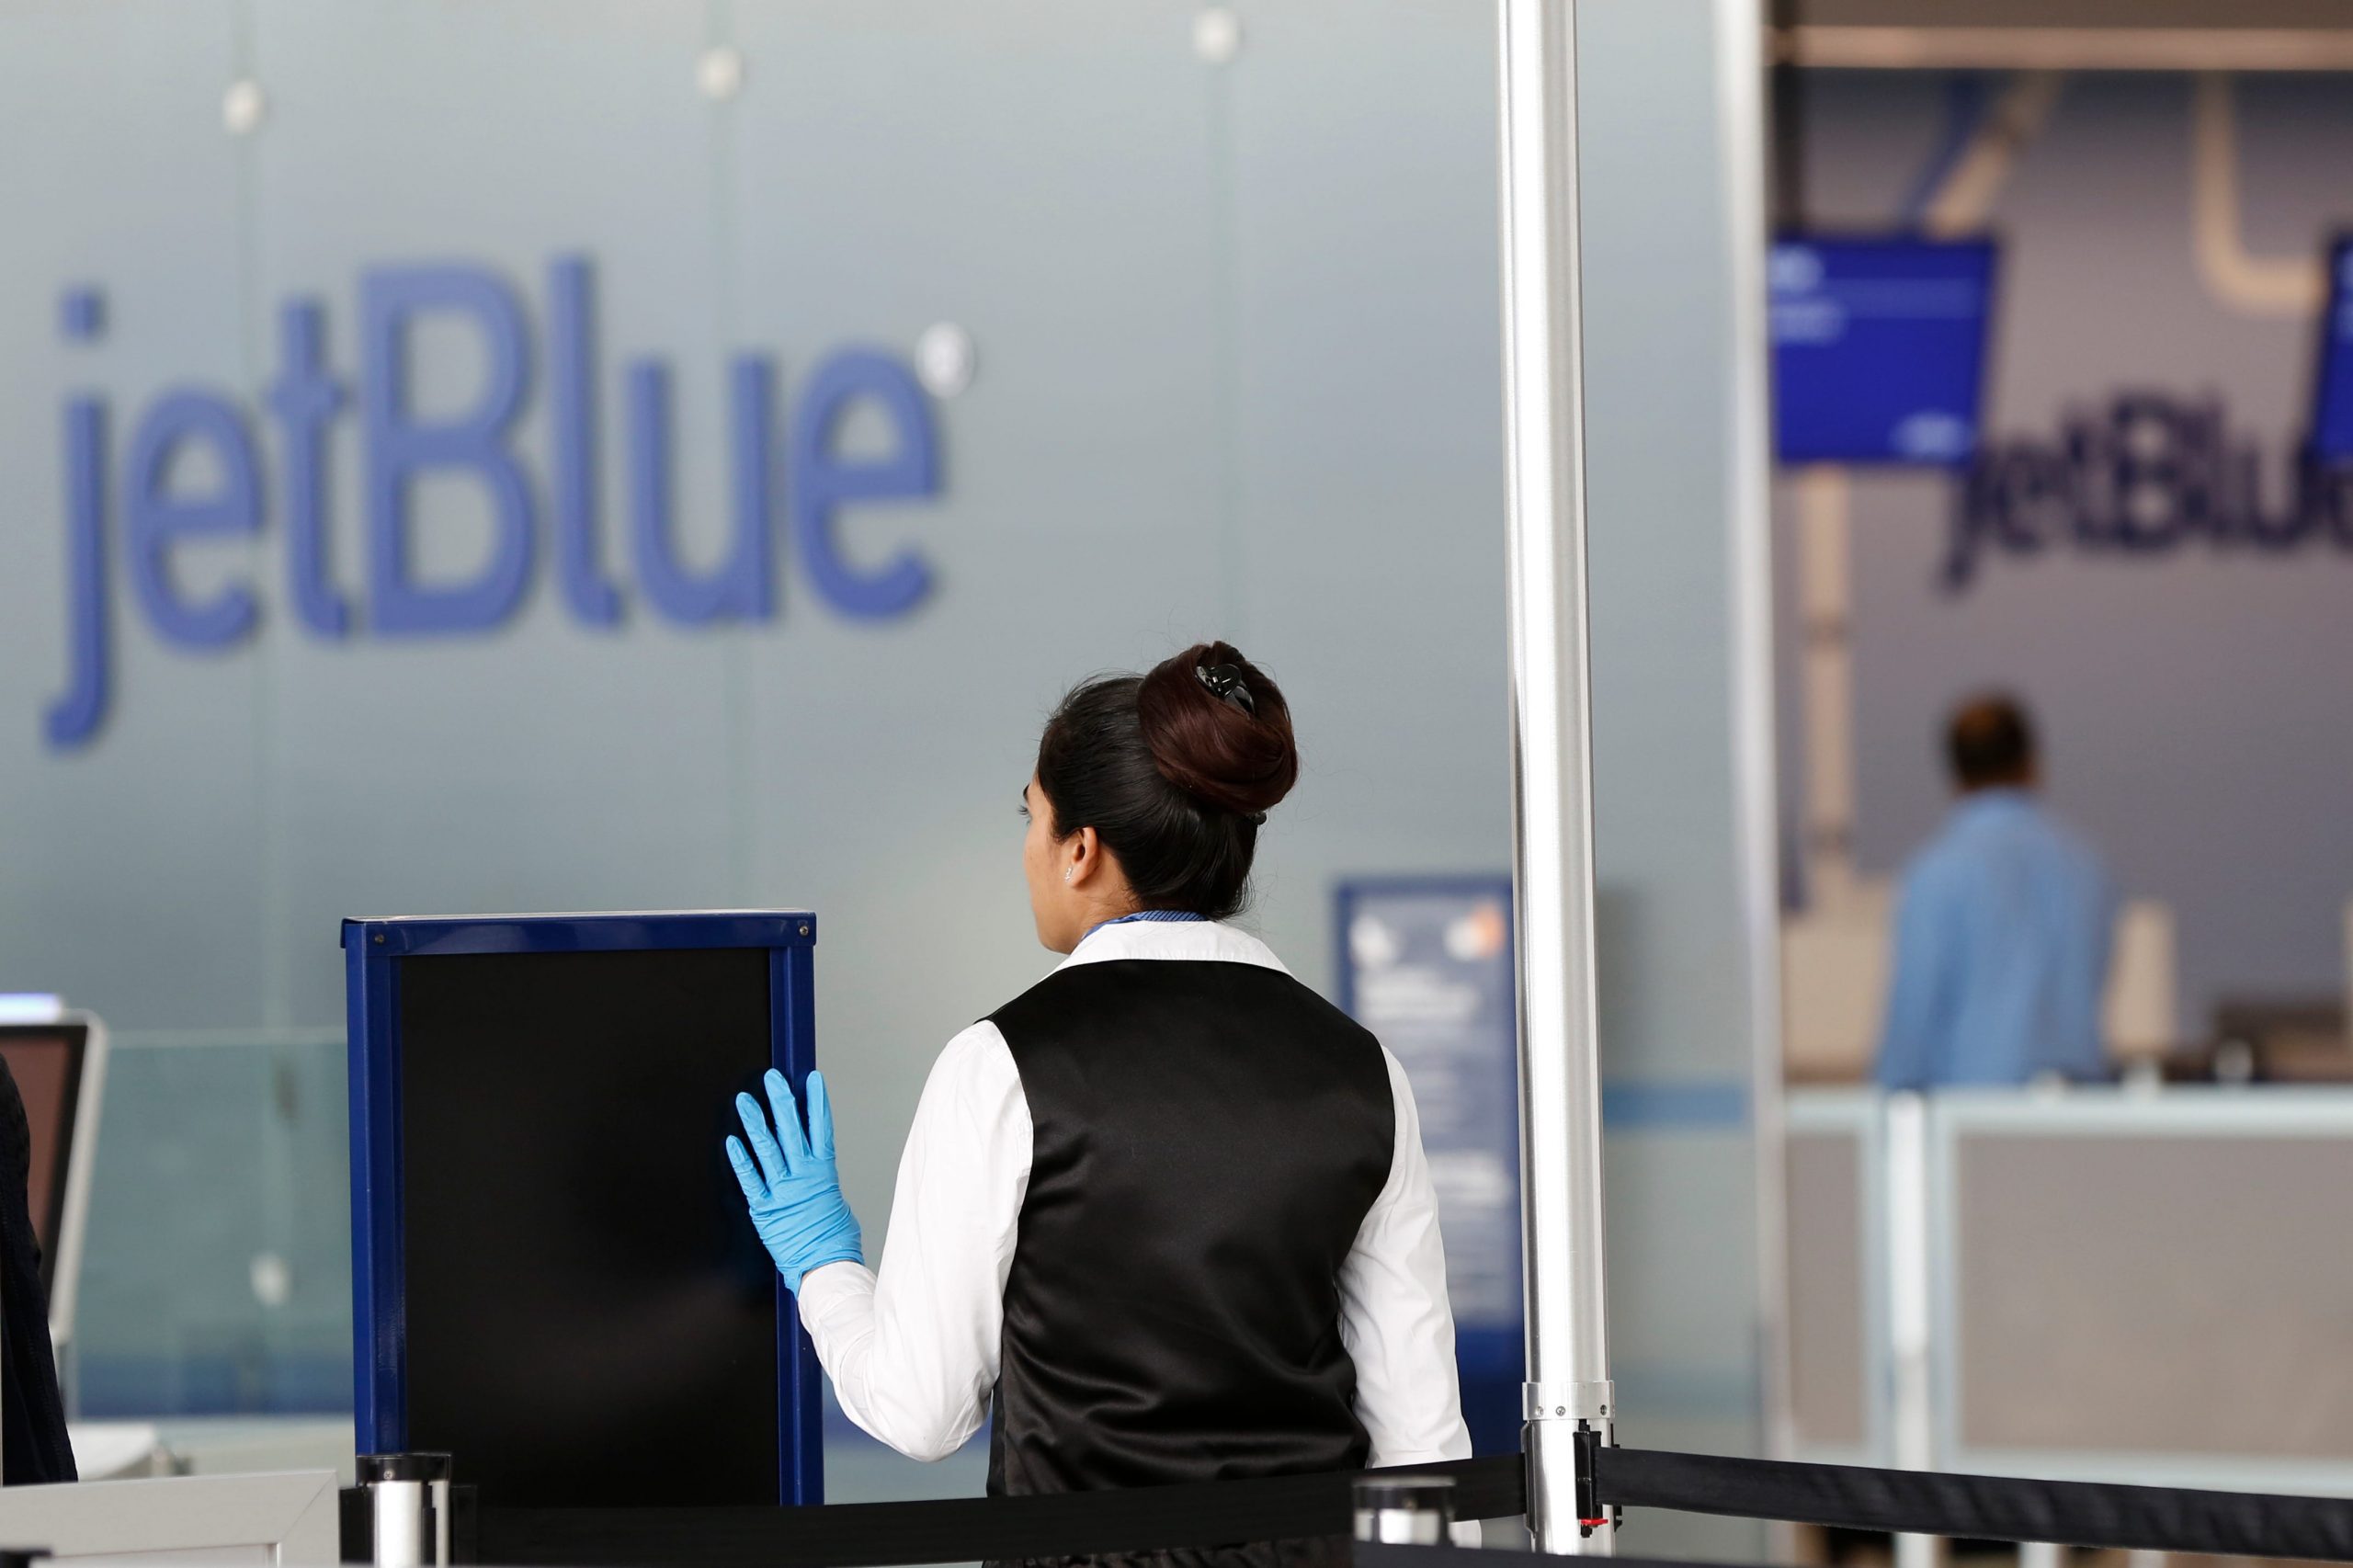 A TSA employee raises her hand to stop passengers in front of a JetBlue sign